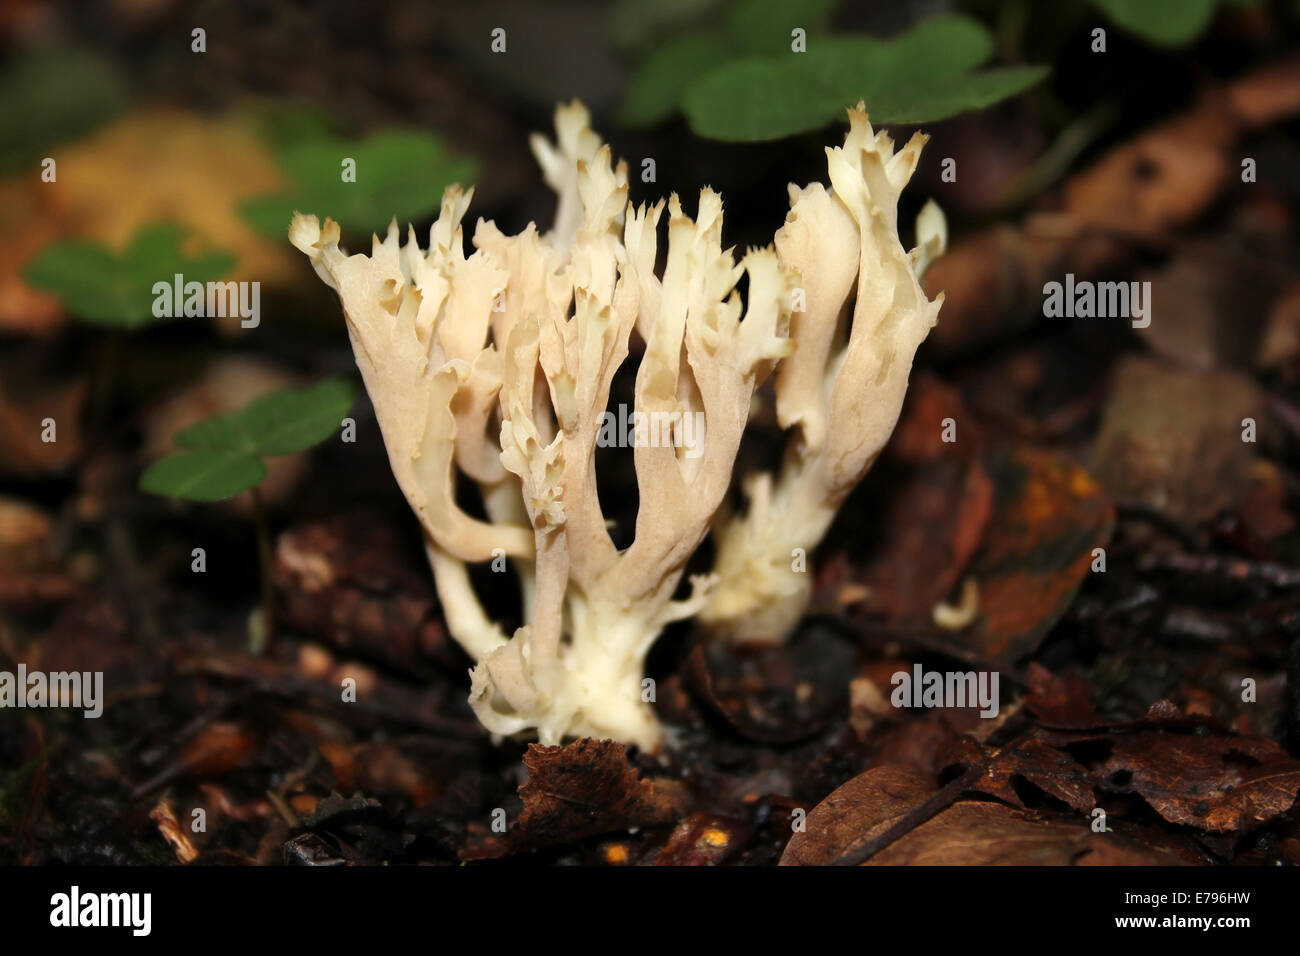 Crested Coral Clavulina coralloides Stock Photo